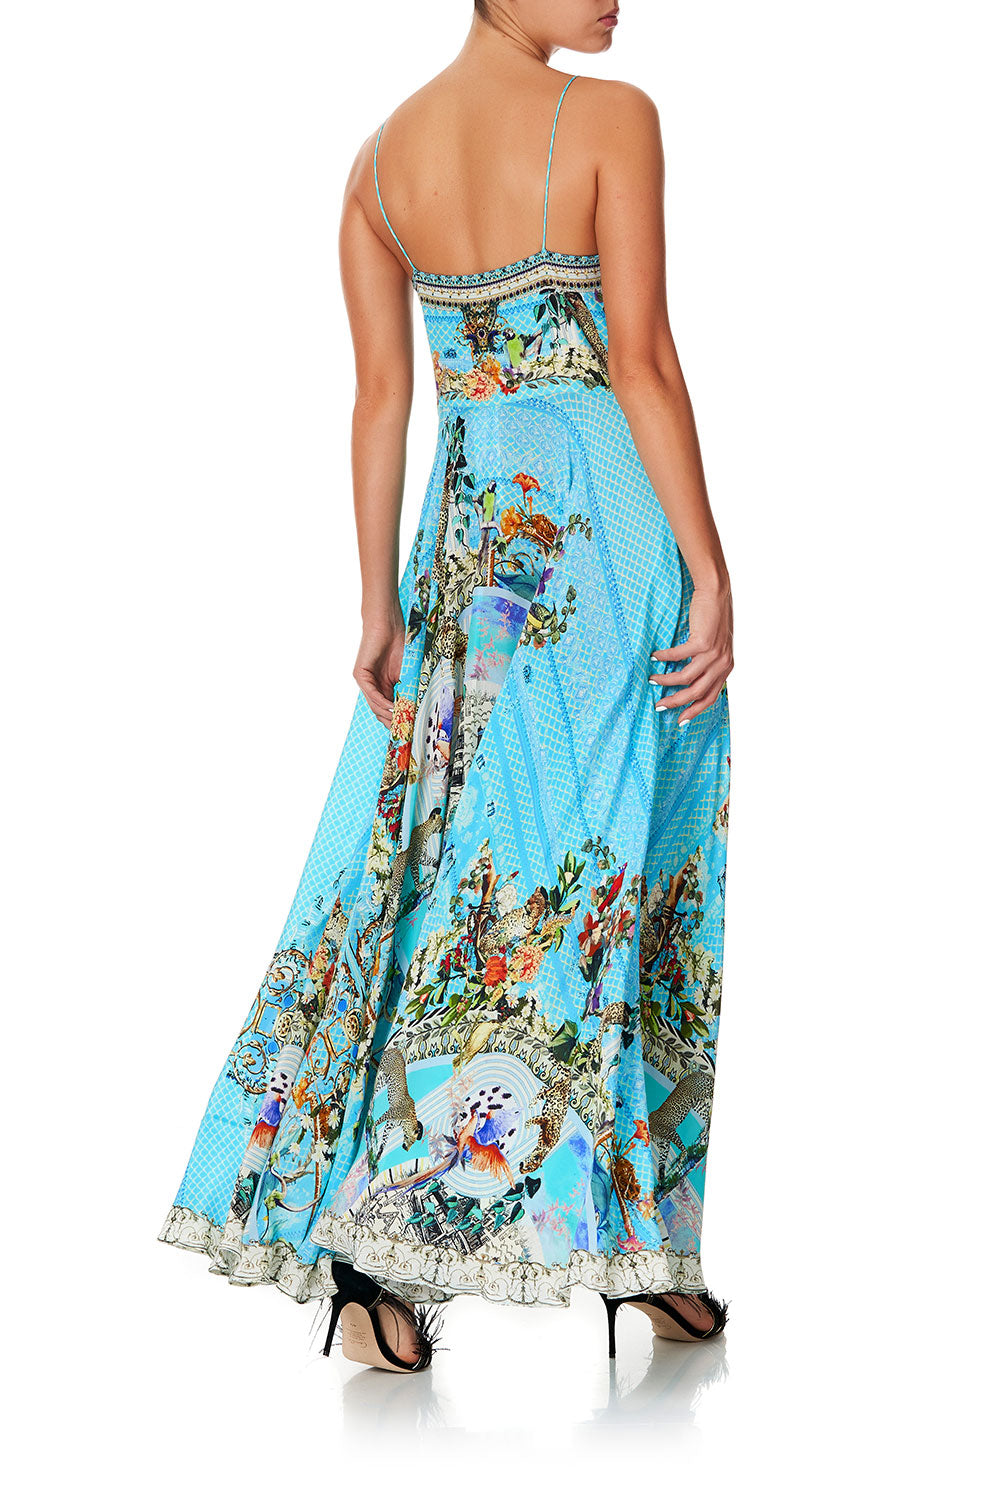 LONG DRESS WITH TIE FRONT GIRL FROM ST TROPEZ